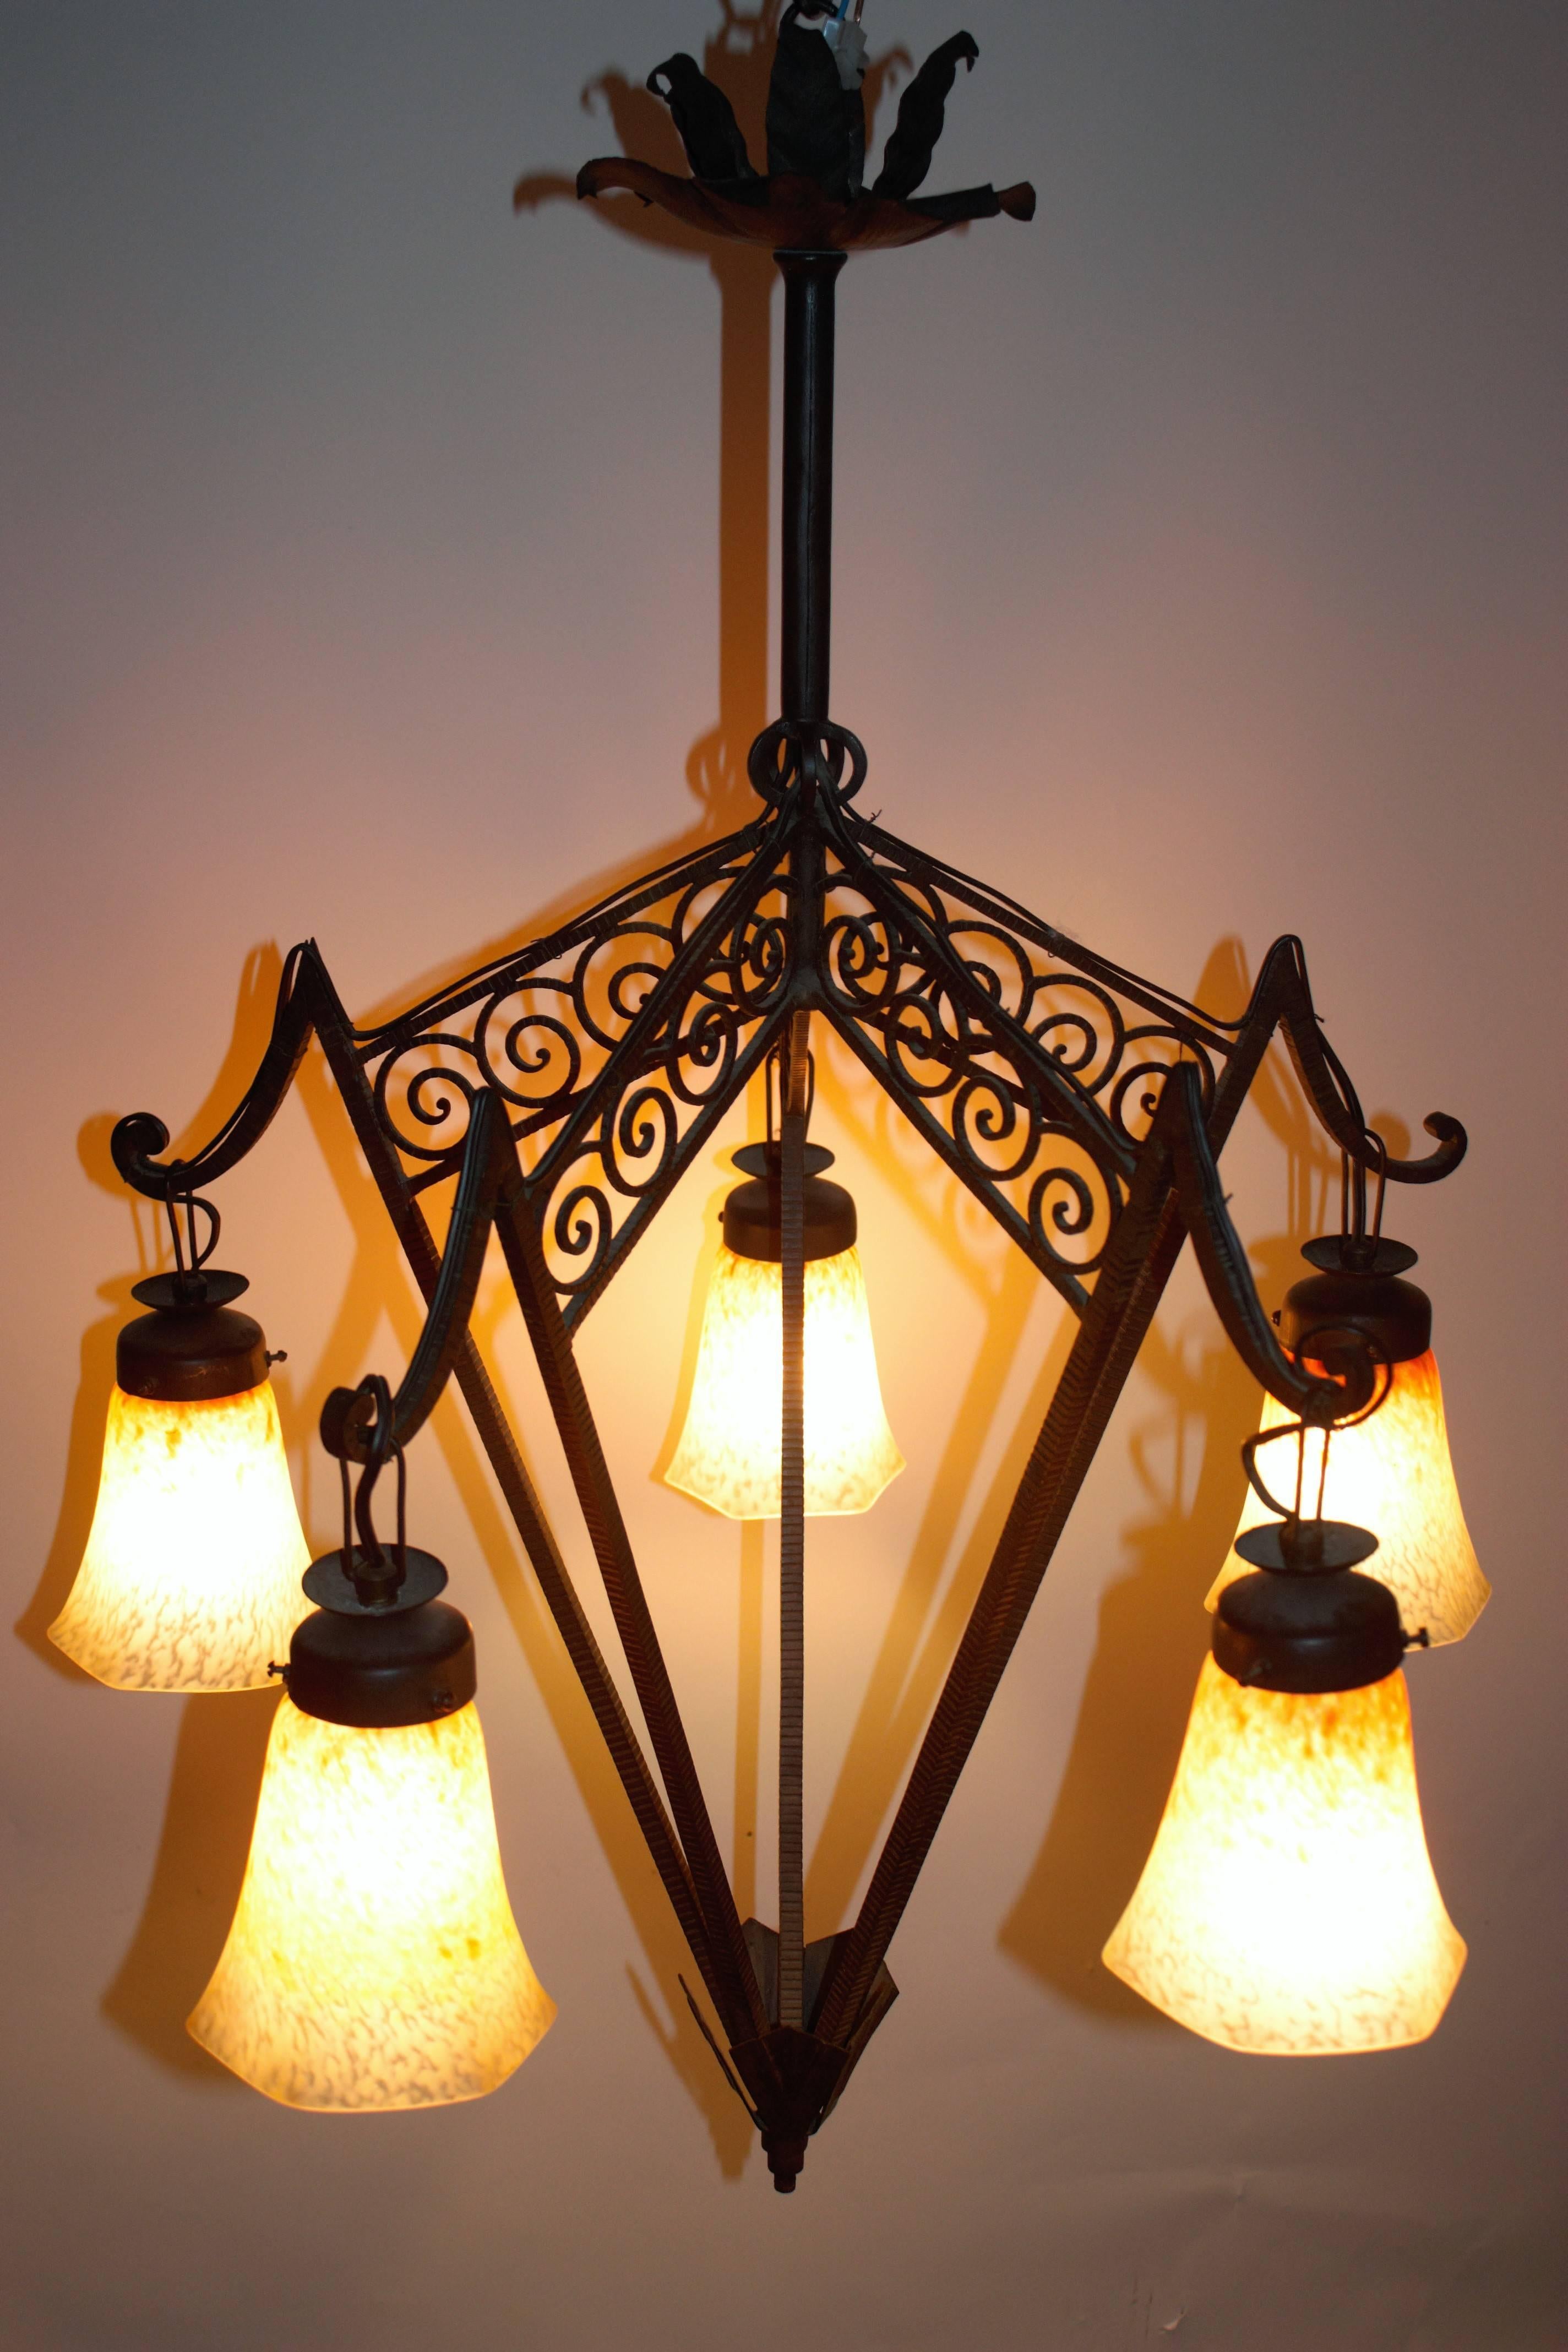 Hammered French Art Deco Wrought Iron and Glass Chandelier, circa 1925